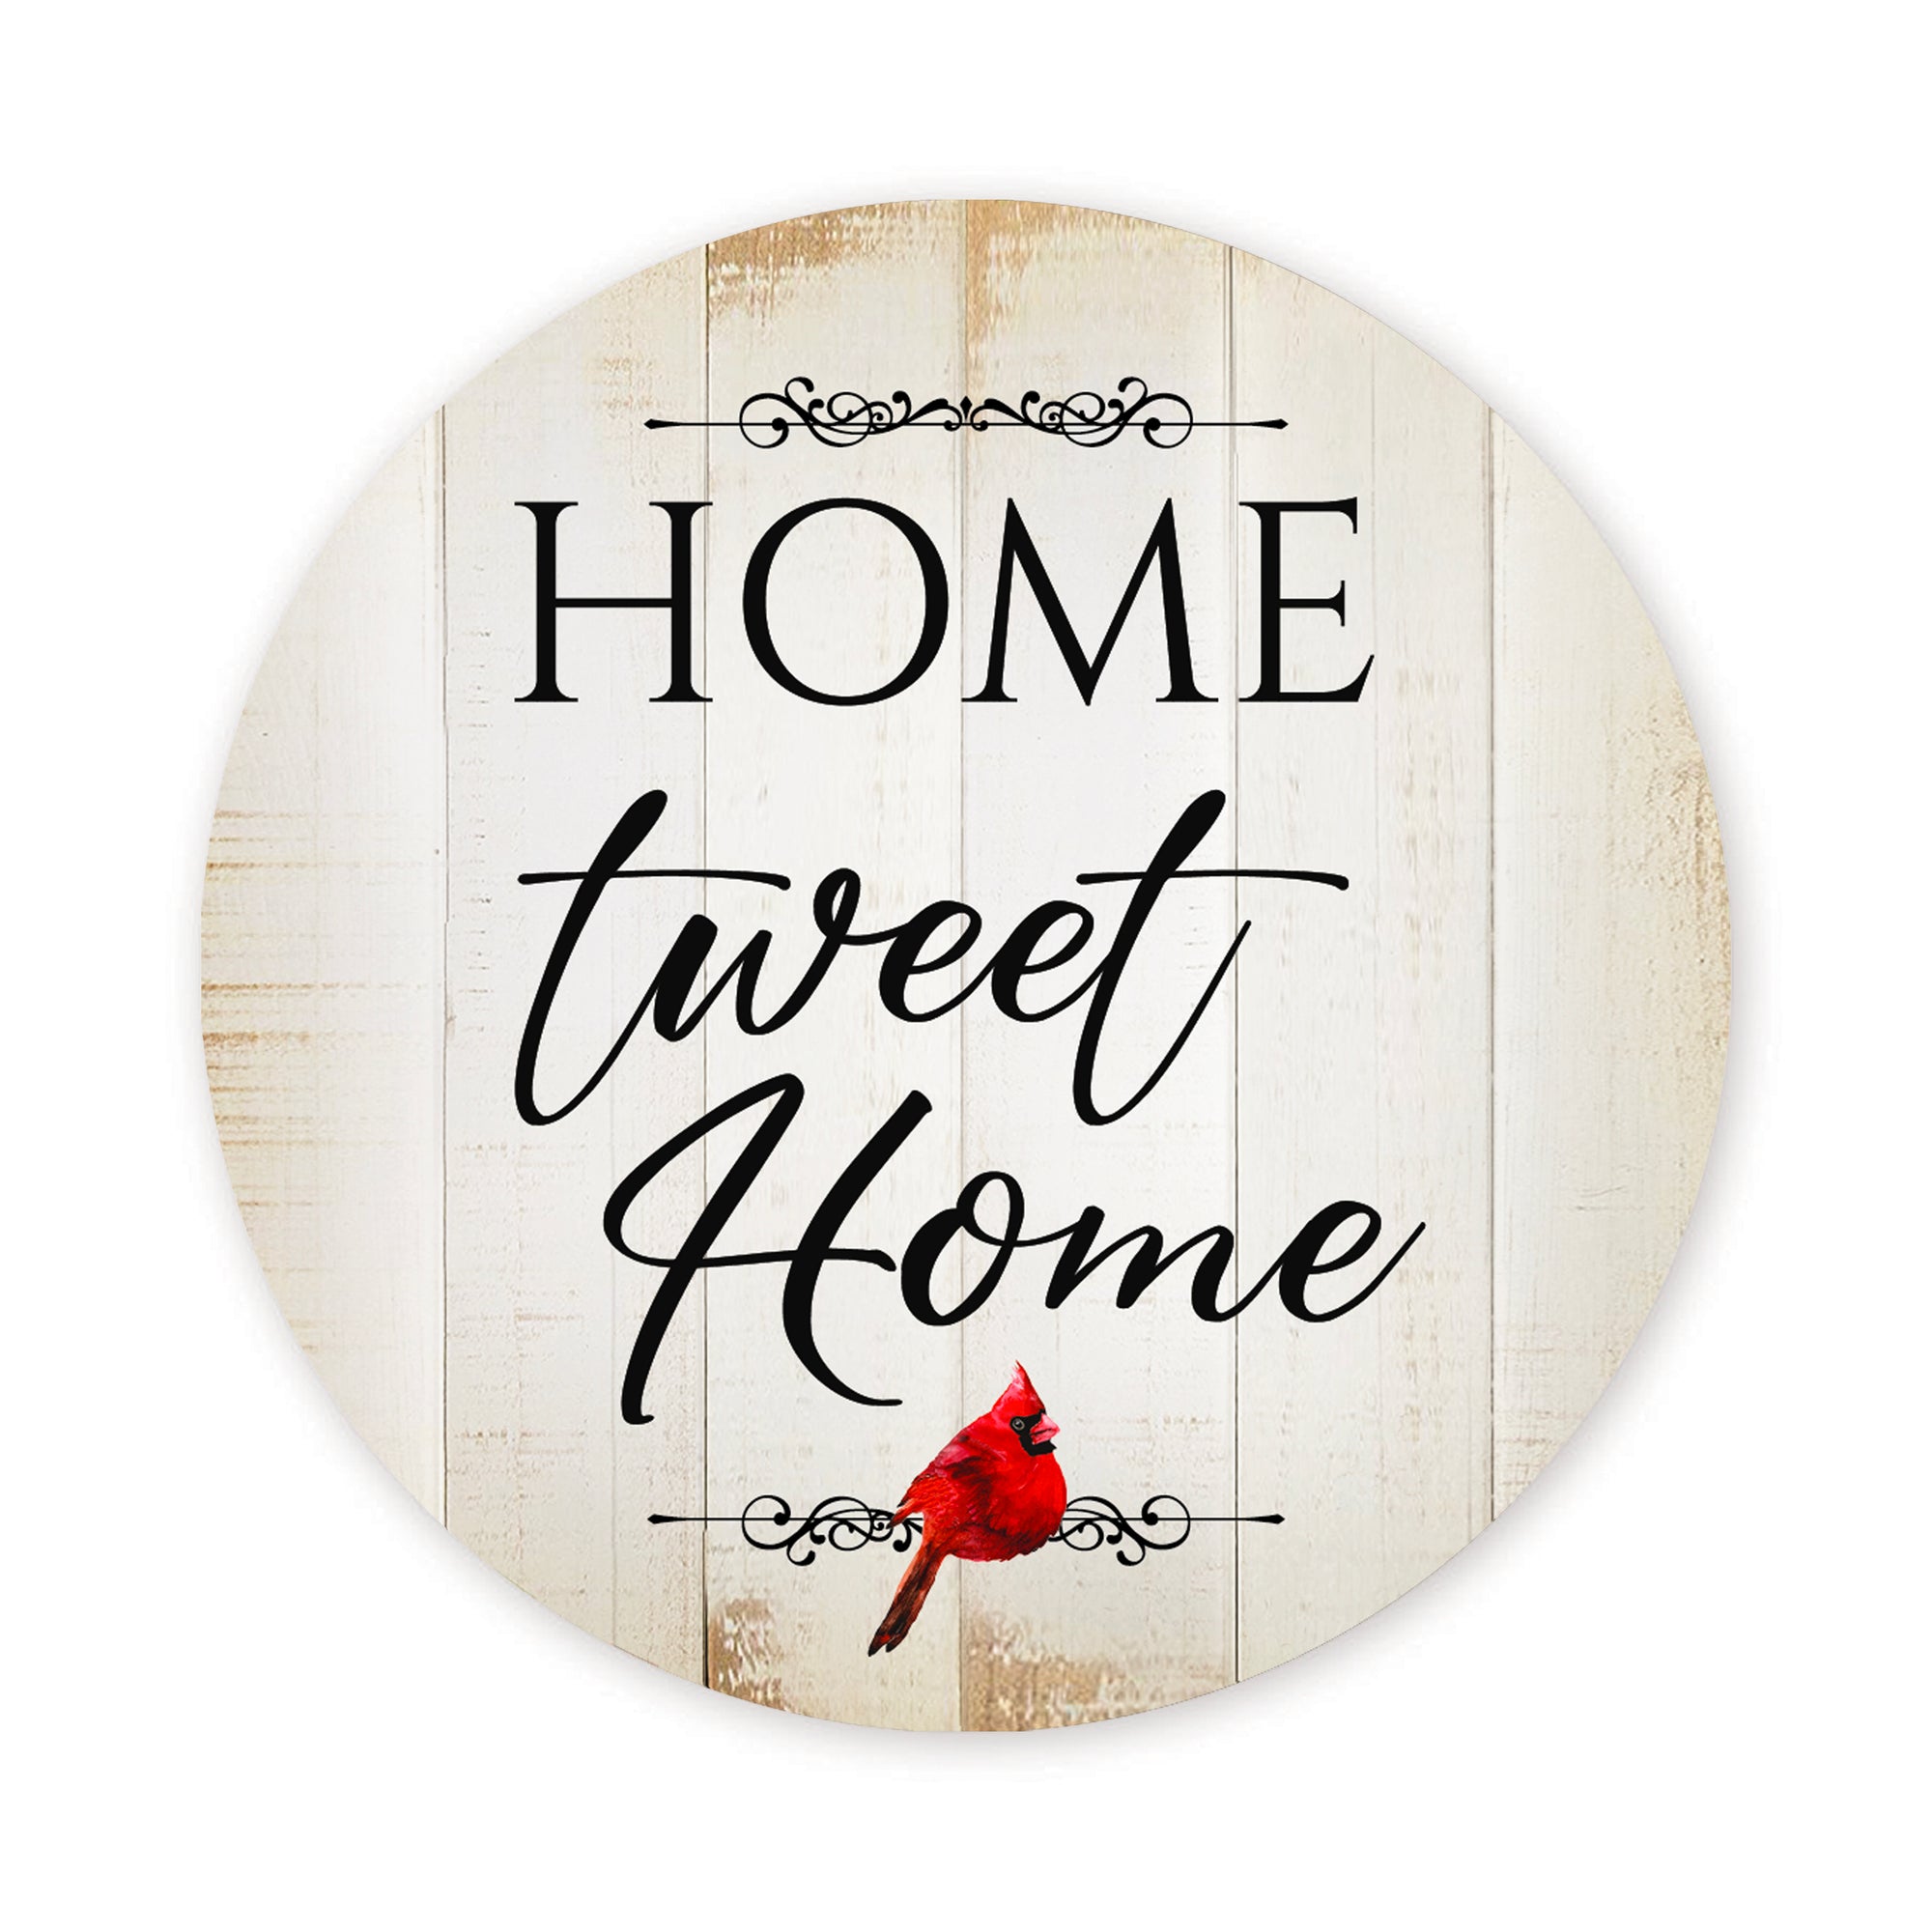 Vintage-Inspired Cardinal Wooden Magnet Printed With Everyday Inspirational Verses Gift Ideas - Home Tweet Home